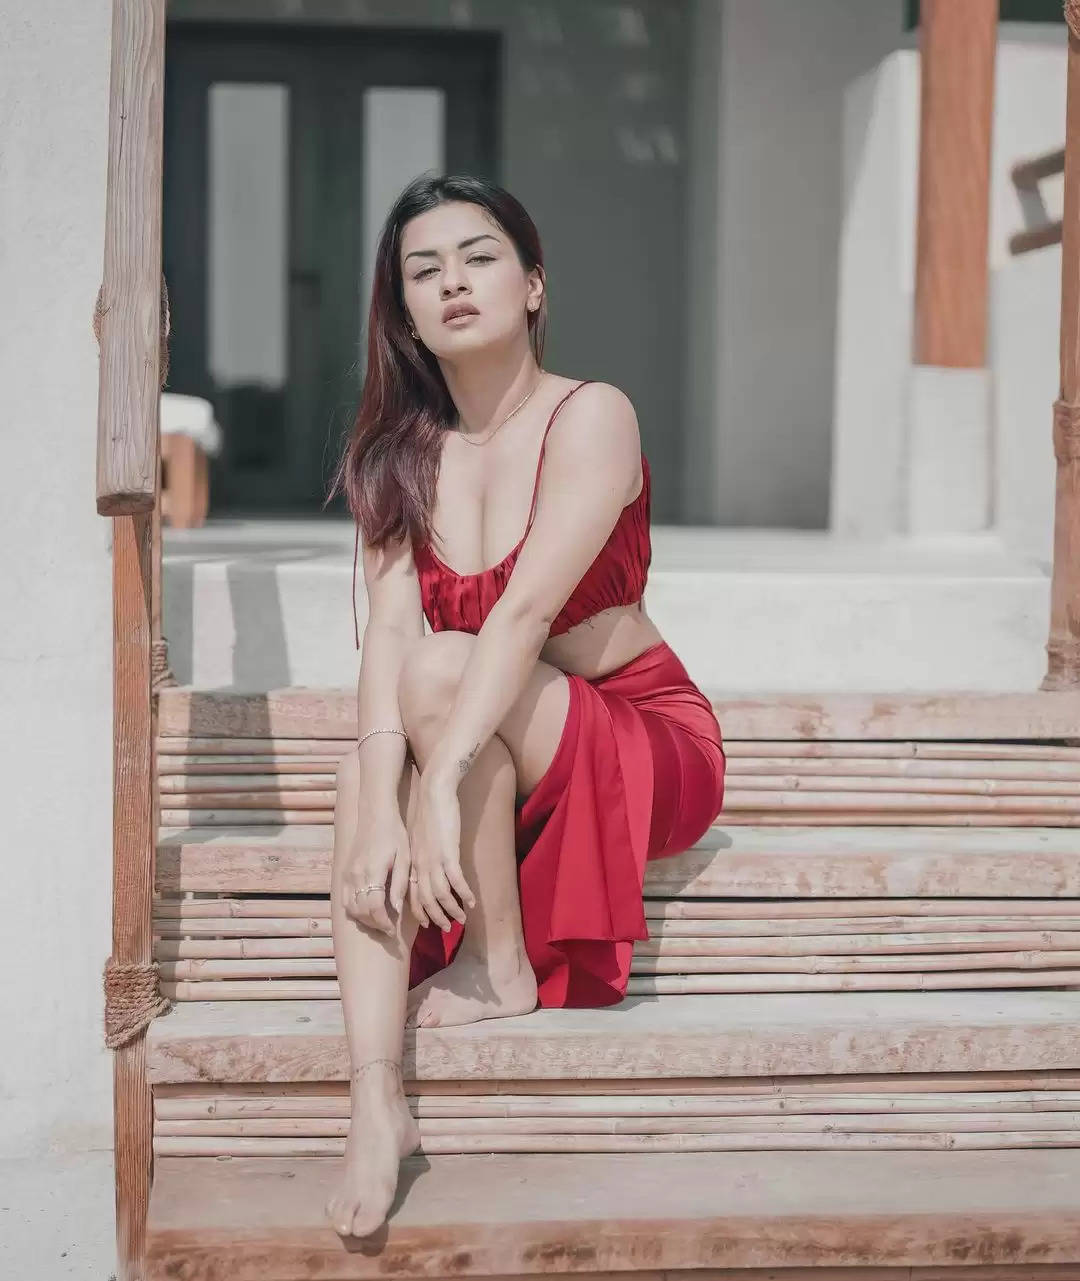 Photos: Avneet Kaur Oozes Sexiness In Two-Piece Satin Red Dress, See Her Pics